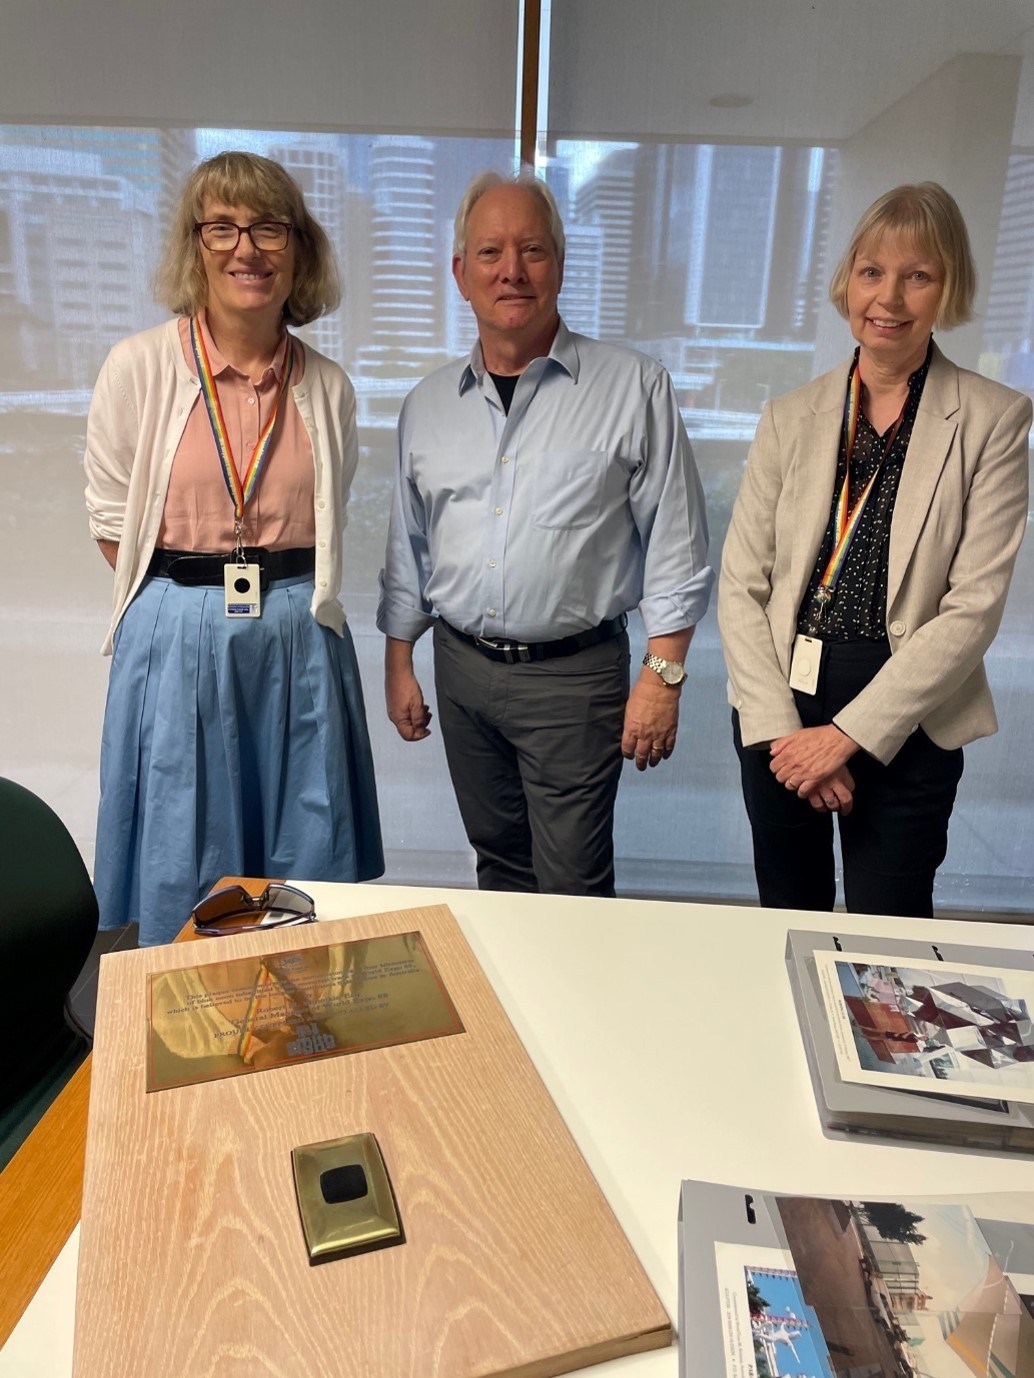 Ric Birch with librarians Robyn Hamilton (left) and Lynn Meyers inspecting some of our existing Expo 88 treasures.